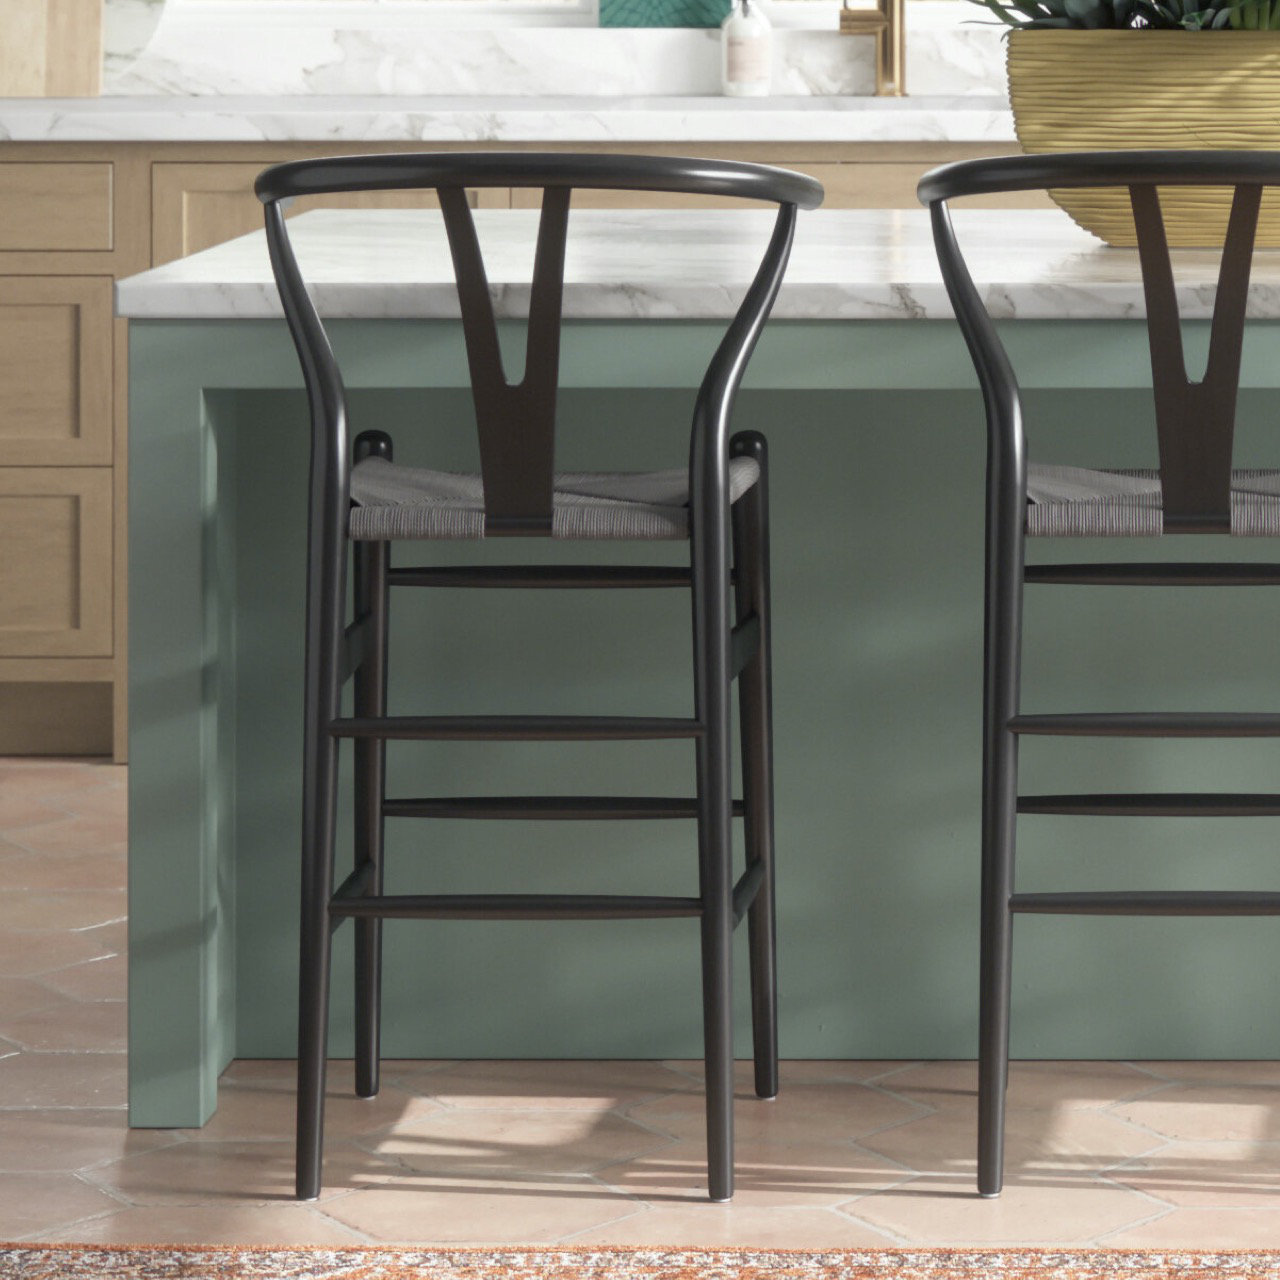 Stylist-Approved Bar Stools